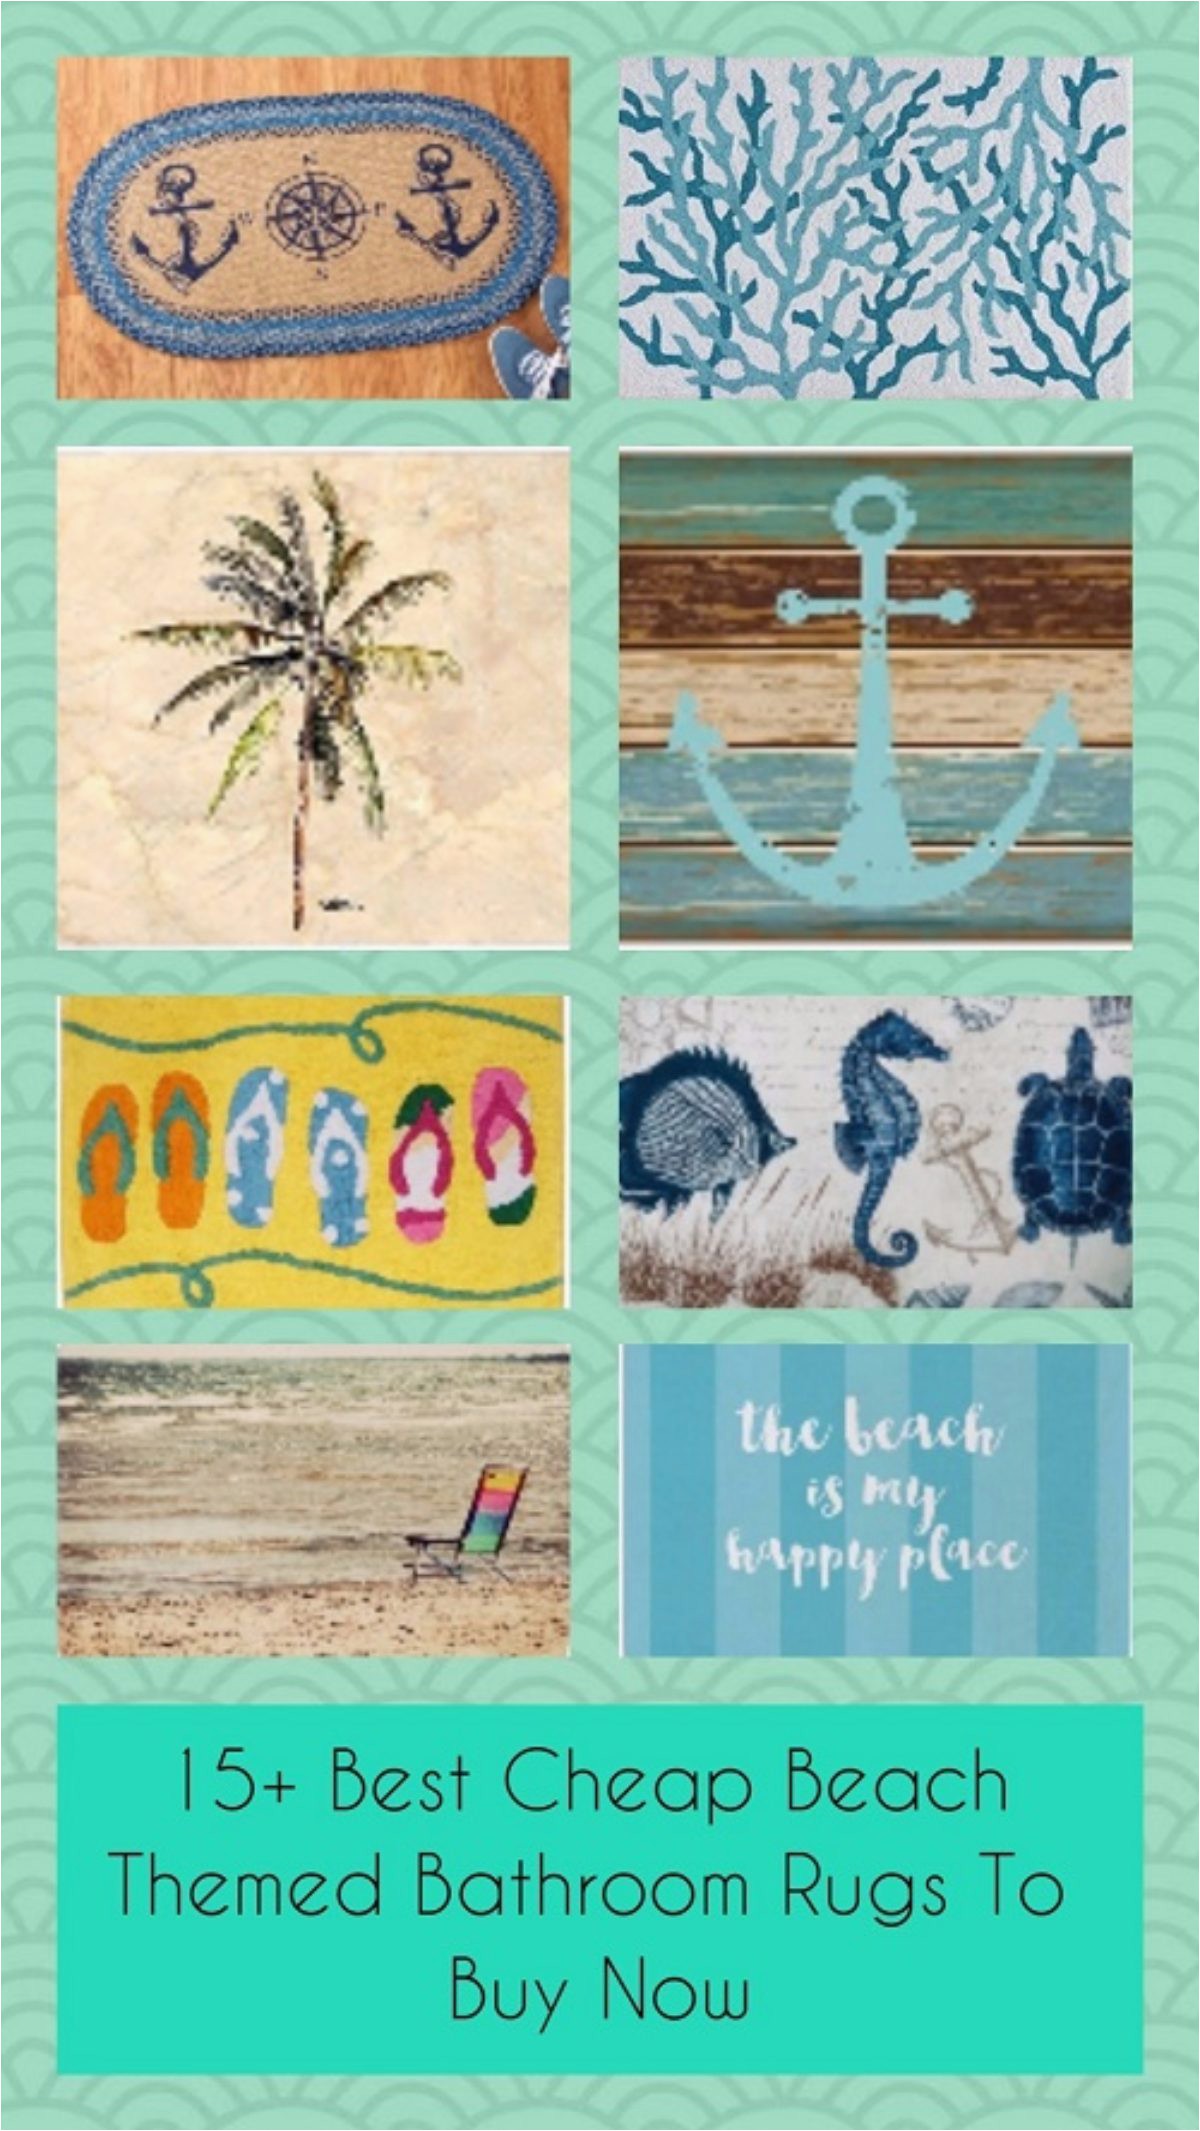 Best Place to Buy Bathroom Rugs 15 Best Cheap Beach themed Bathroom Rugs to Buy now